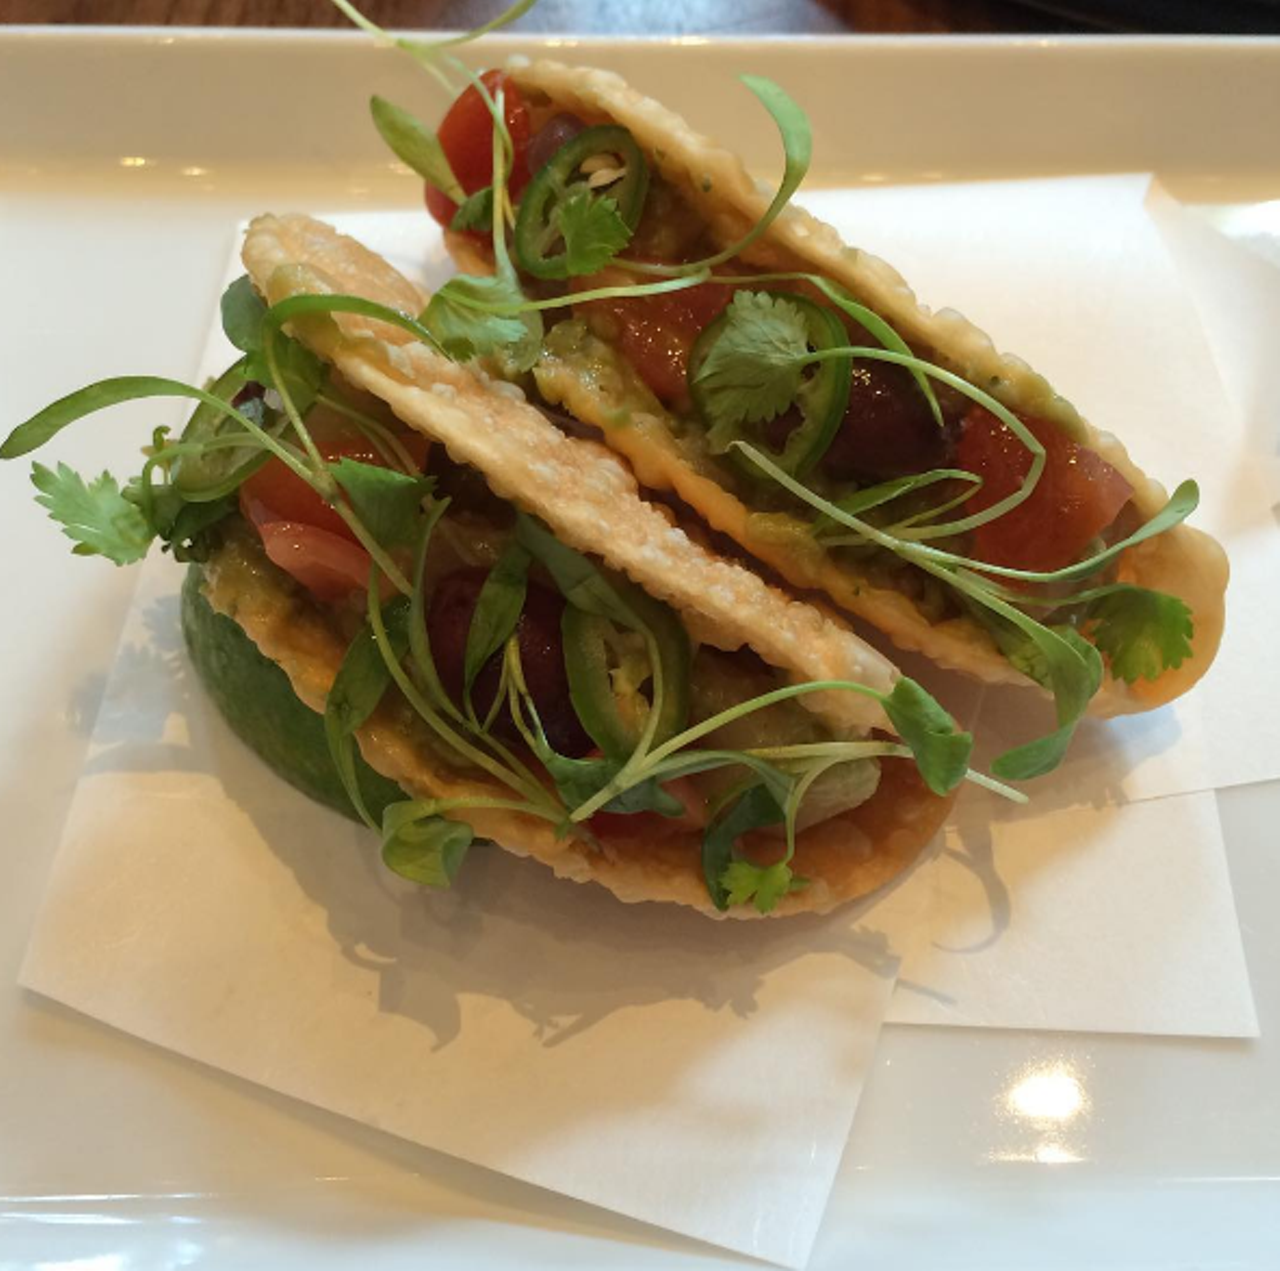 Hamachi tacos at Morimoto Asia
1600 Buena Vista Drive, 407-939-6686
Sushi-grade yellowtail served in fried gyoza wrappers (so cute!) and topped with cilantro, guacamole, olives and jalape&ntilde;o.
Photo via patriciasari/Instagram